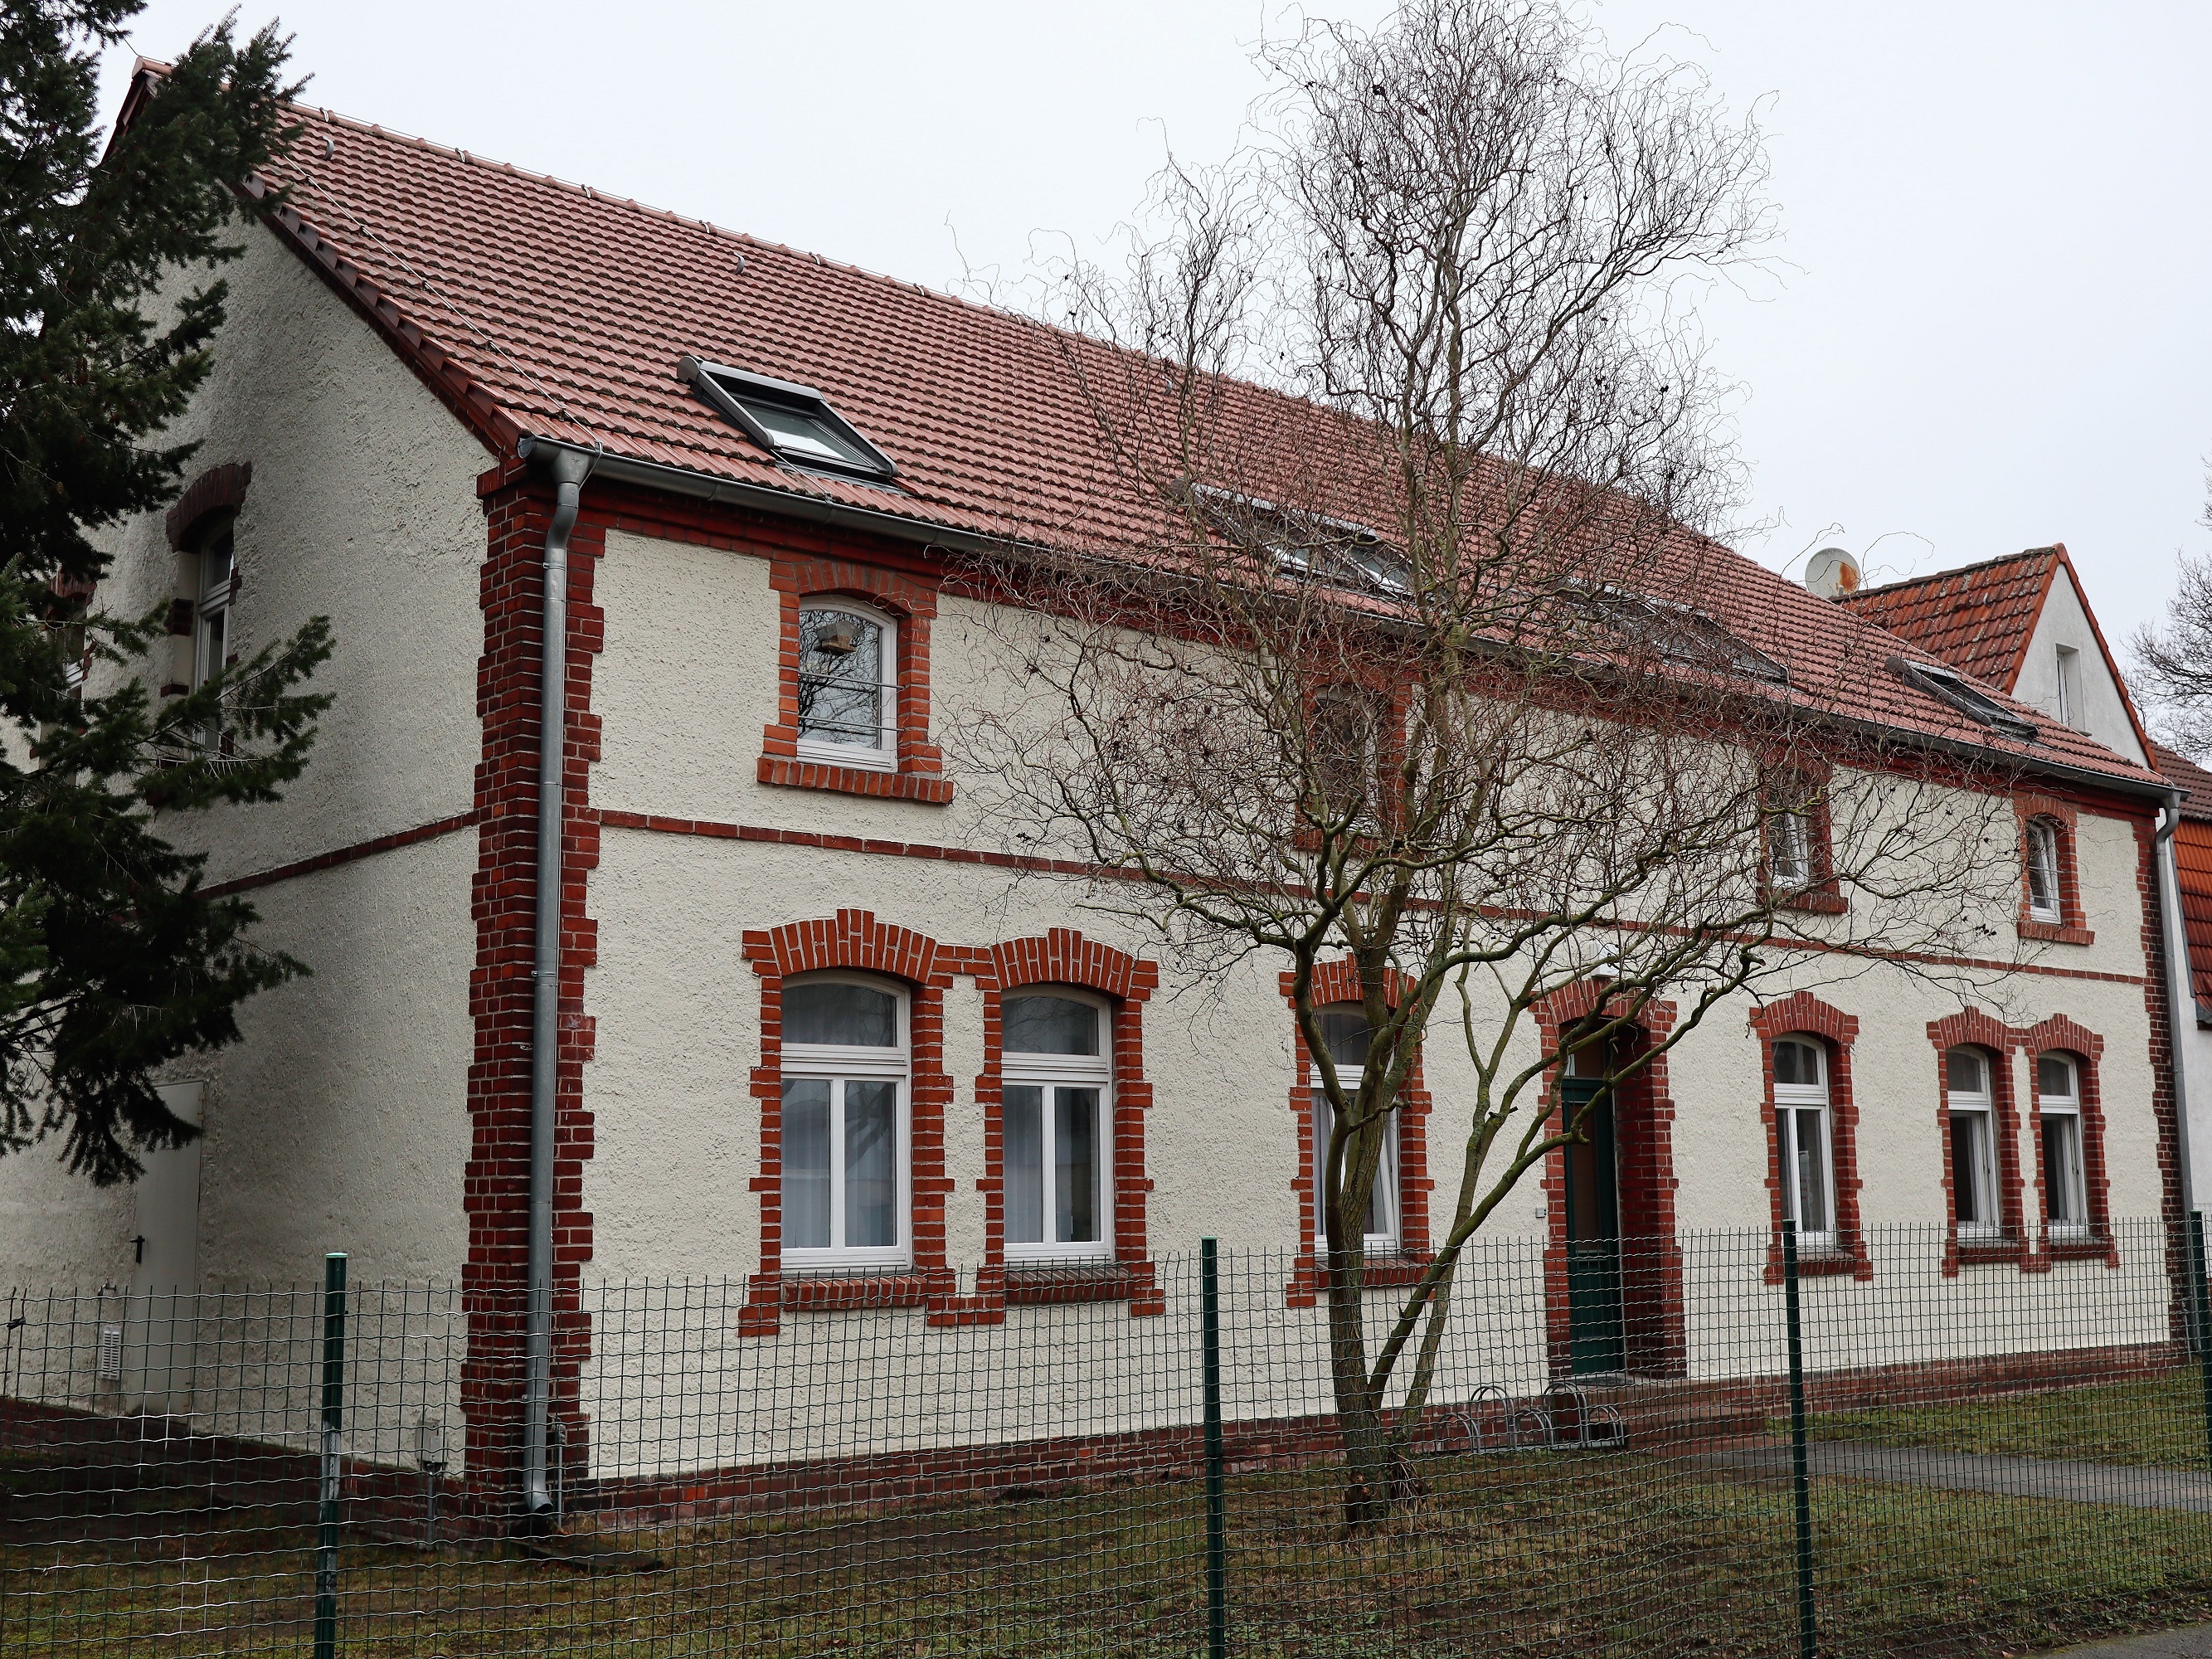 PuR emergency shelter for homeless people in Hennigsdorf